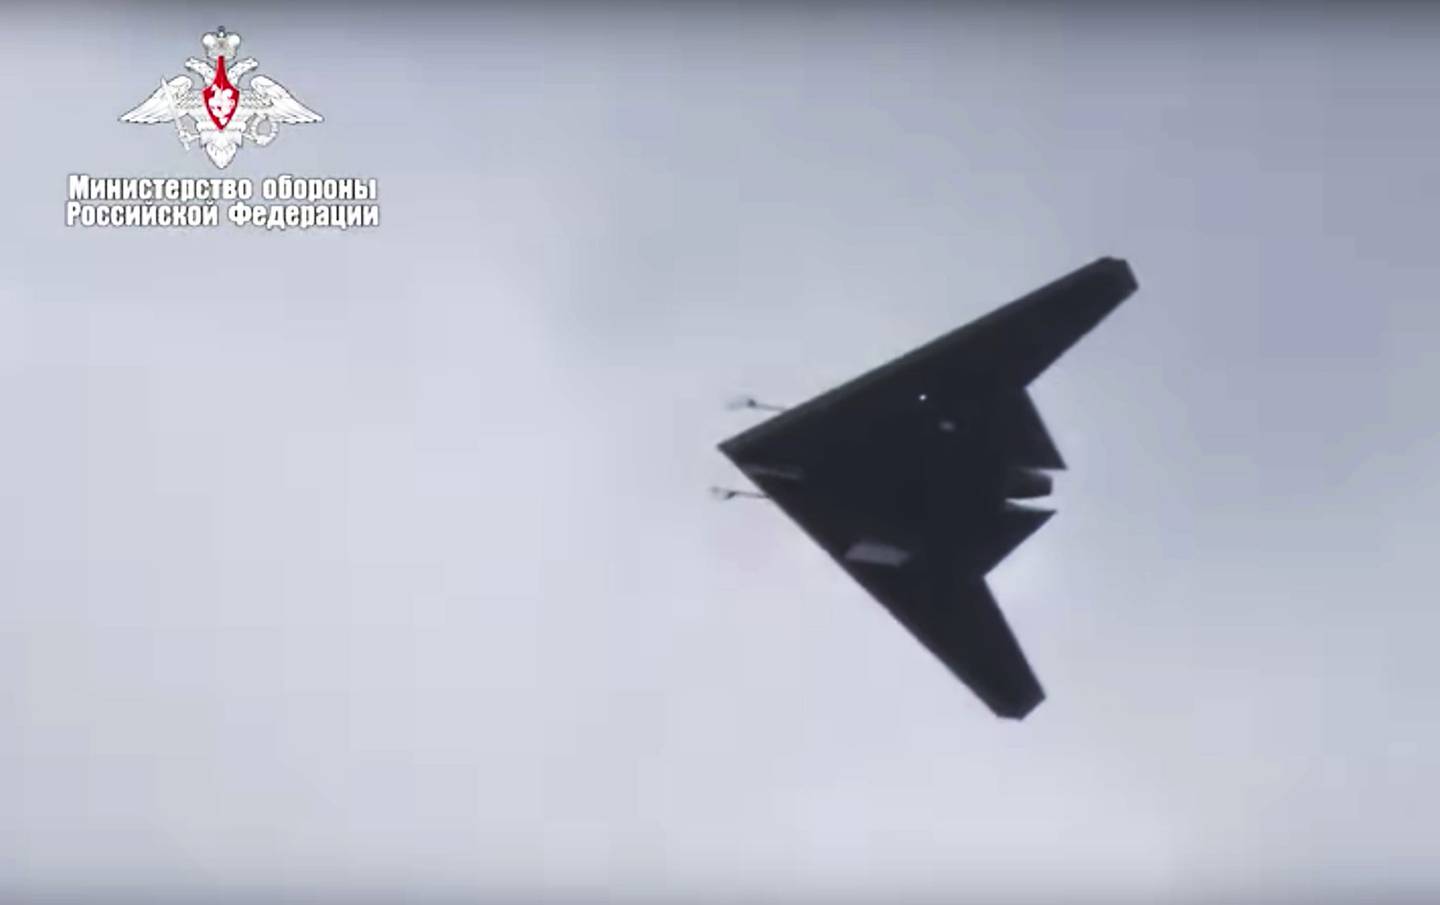 In this video grab made available on Wednesday, Aug. 7, 2019, by Russian Defense Ministry Press Service, Russia's military drone Okhotnik is seen in flight at an unidentified location in Russia.